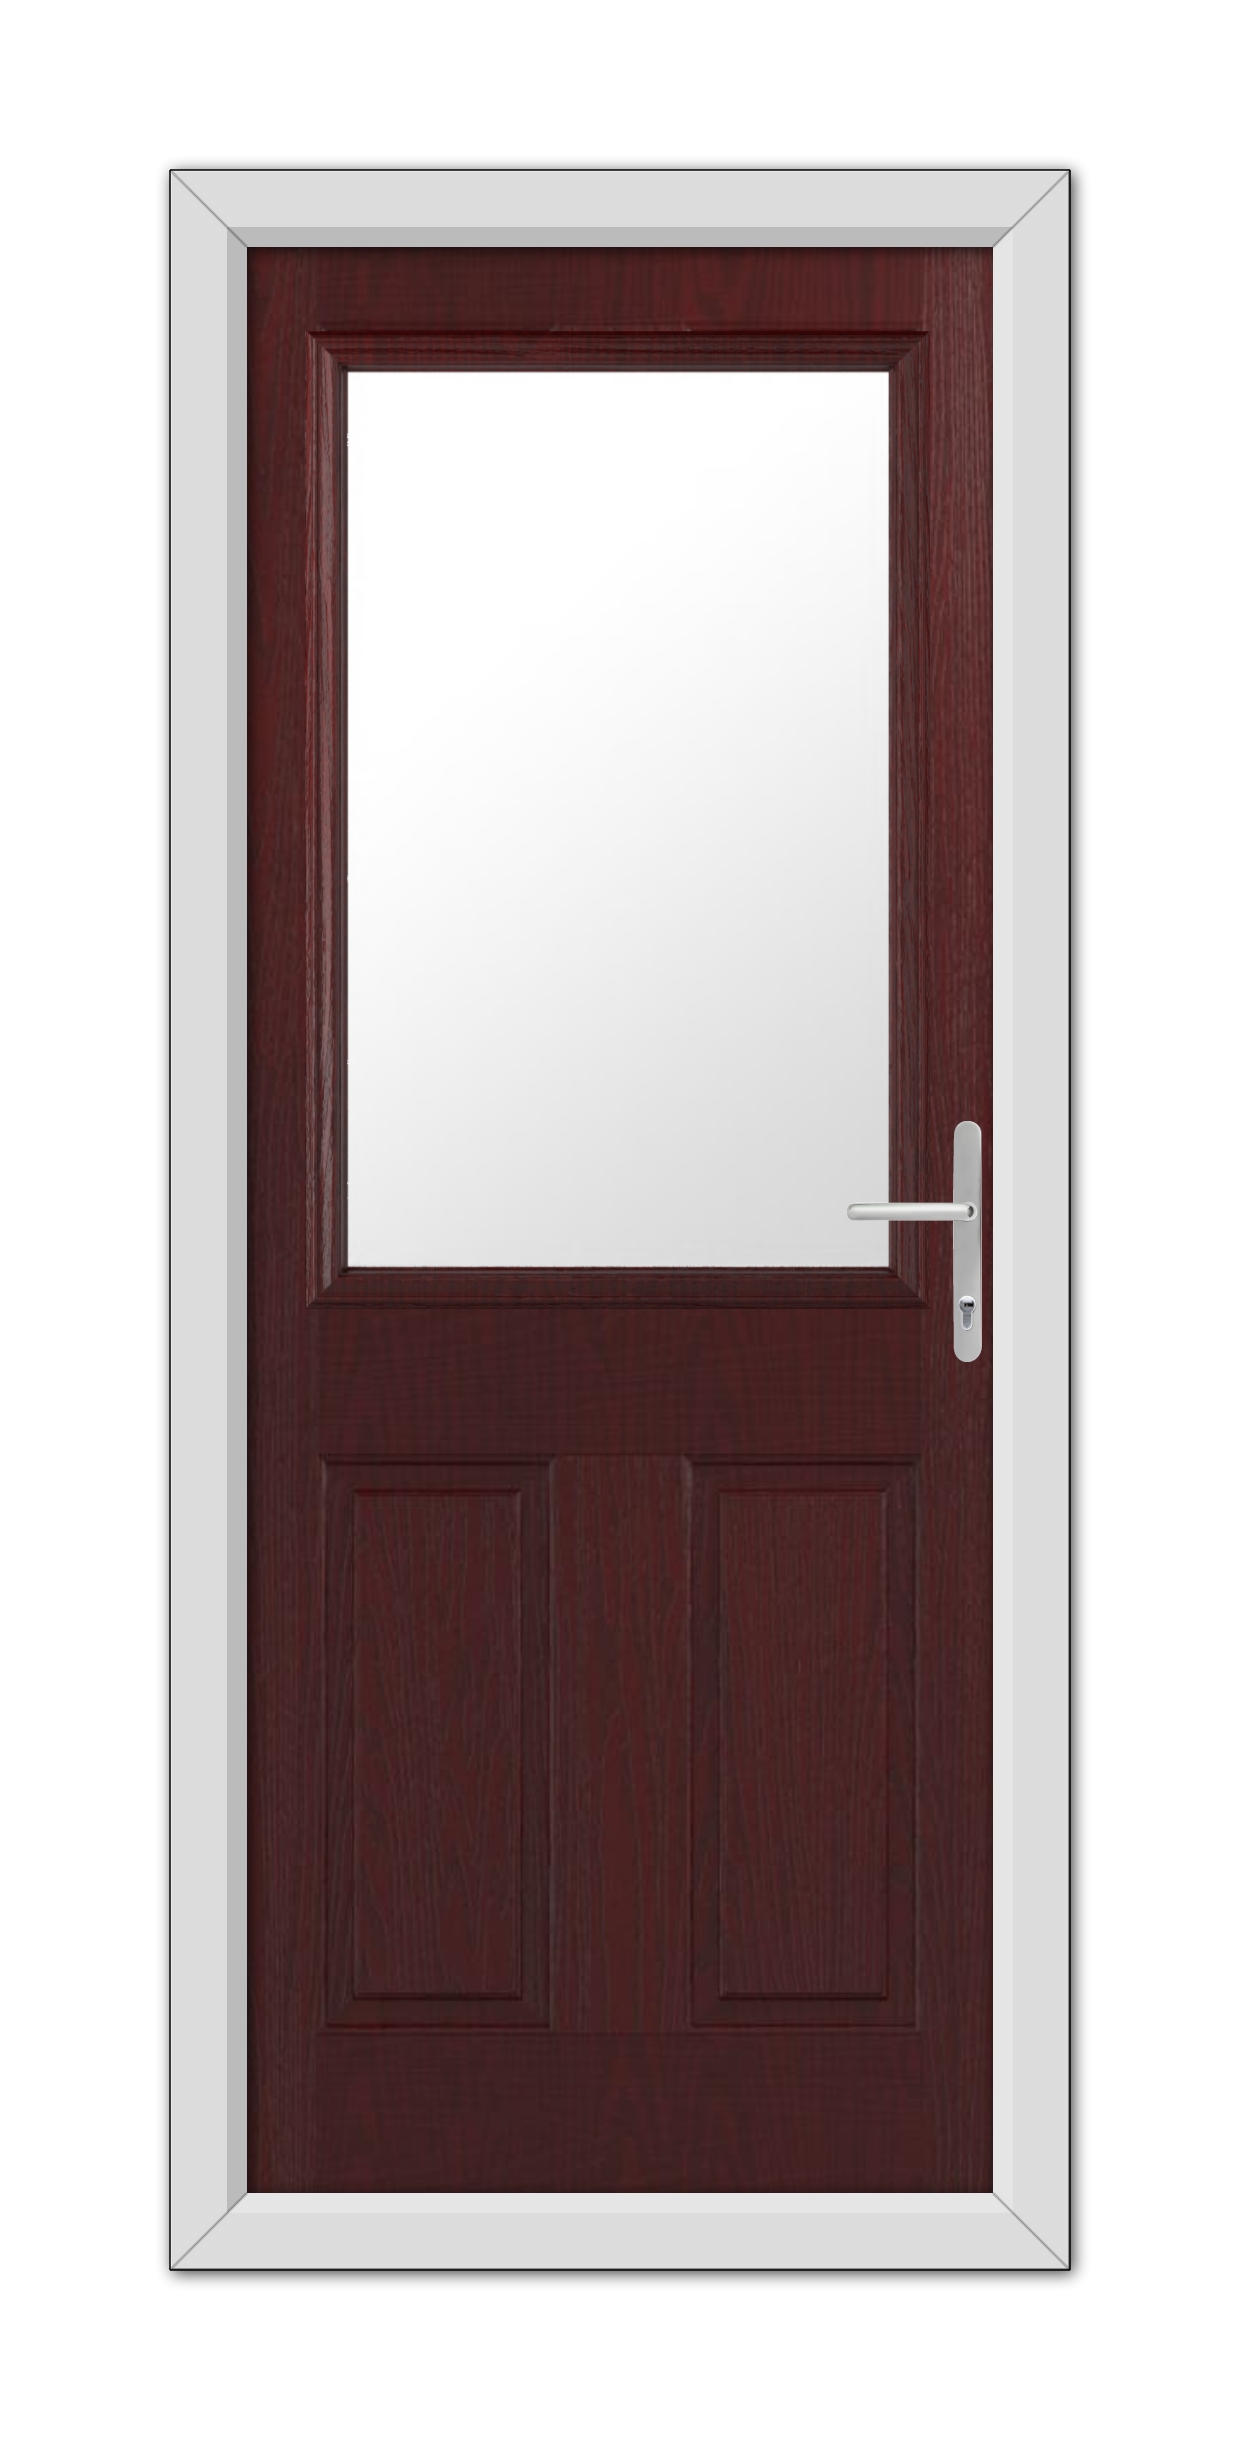 A Rosewood Buxton Composite Door 48mm Timber Core with a white frame, featuring a large rectangular window at the top and a metal handle on the right side.